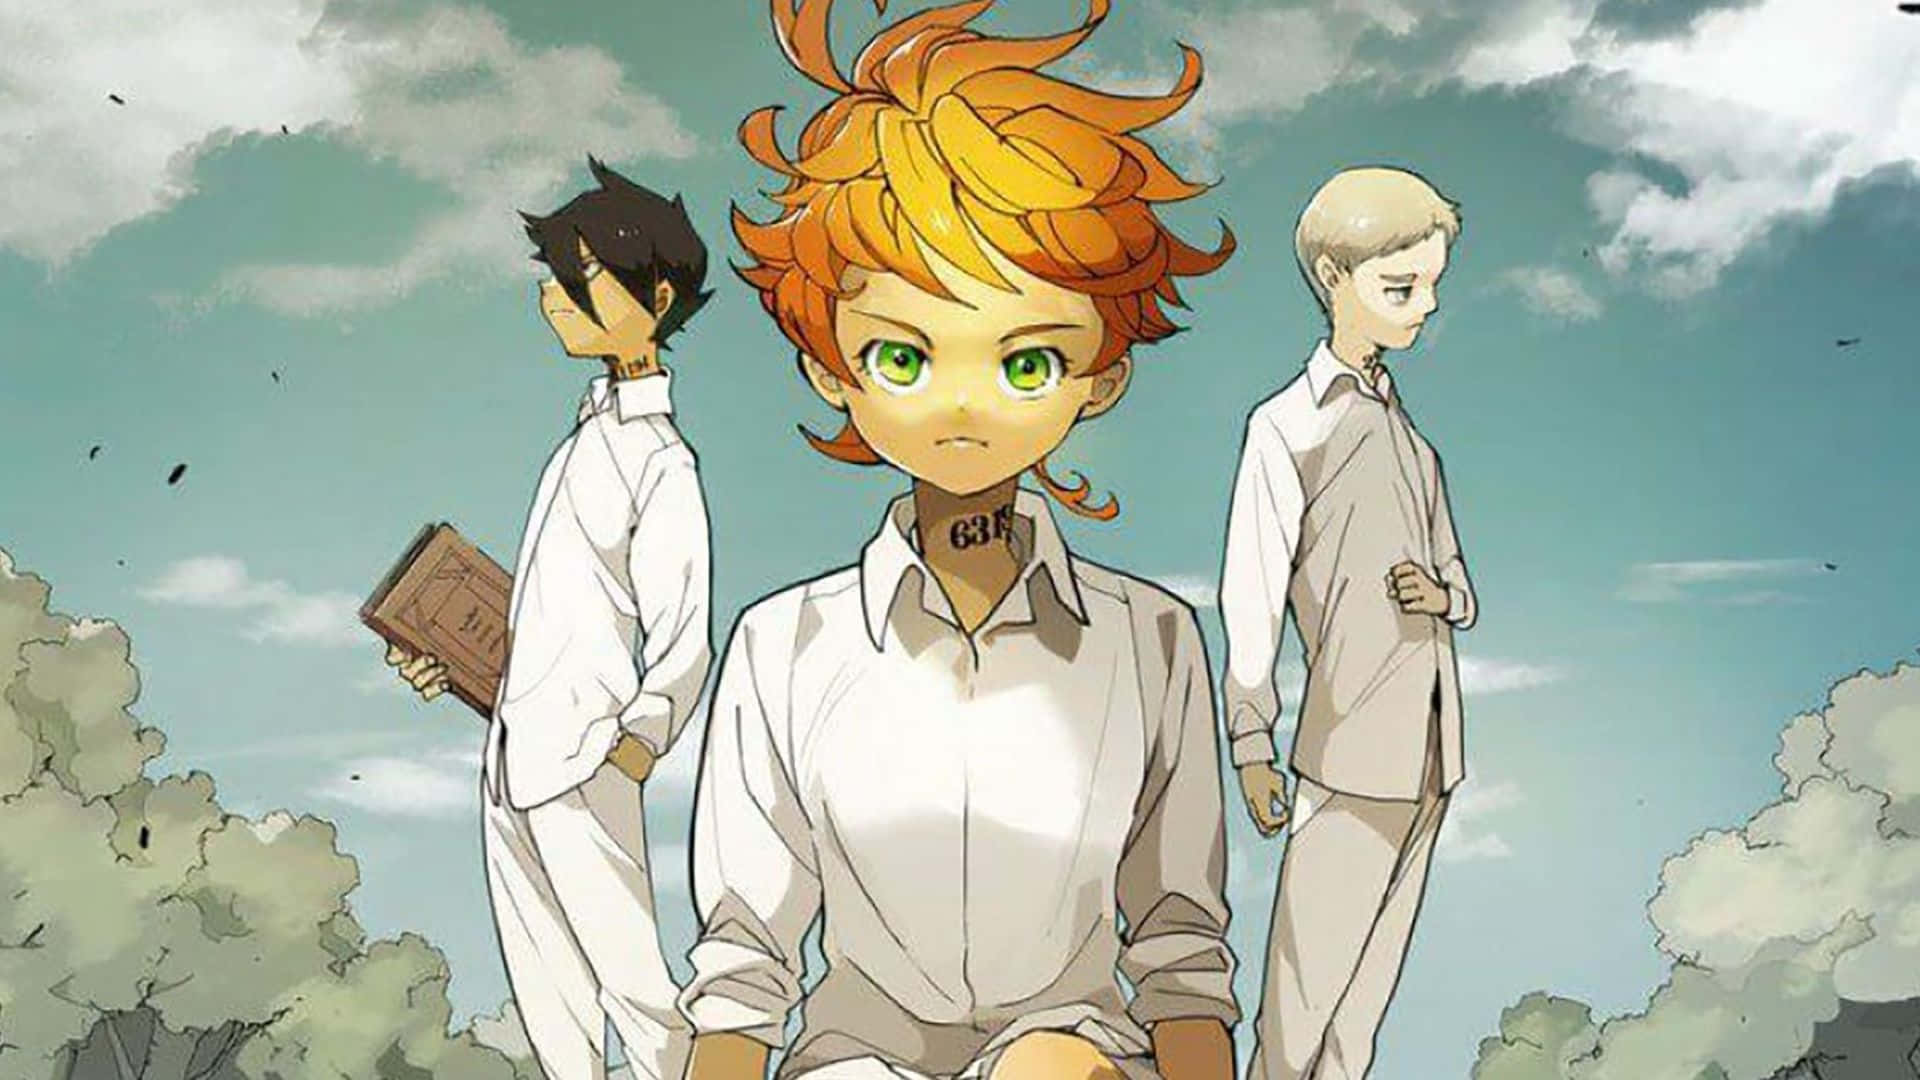 Emma, Ray, and Norman in The Promised Neverland Wallpaper